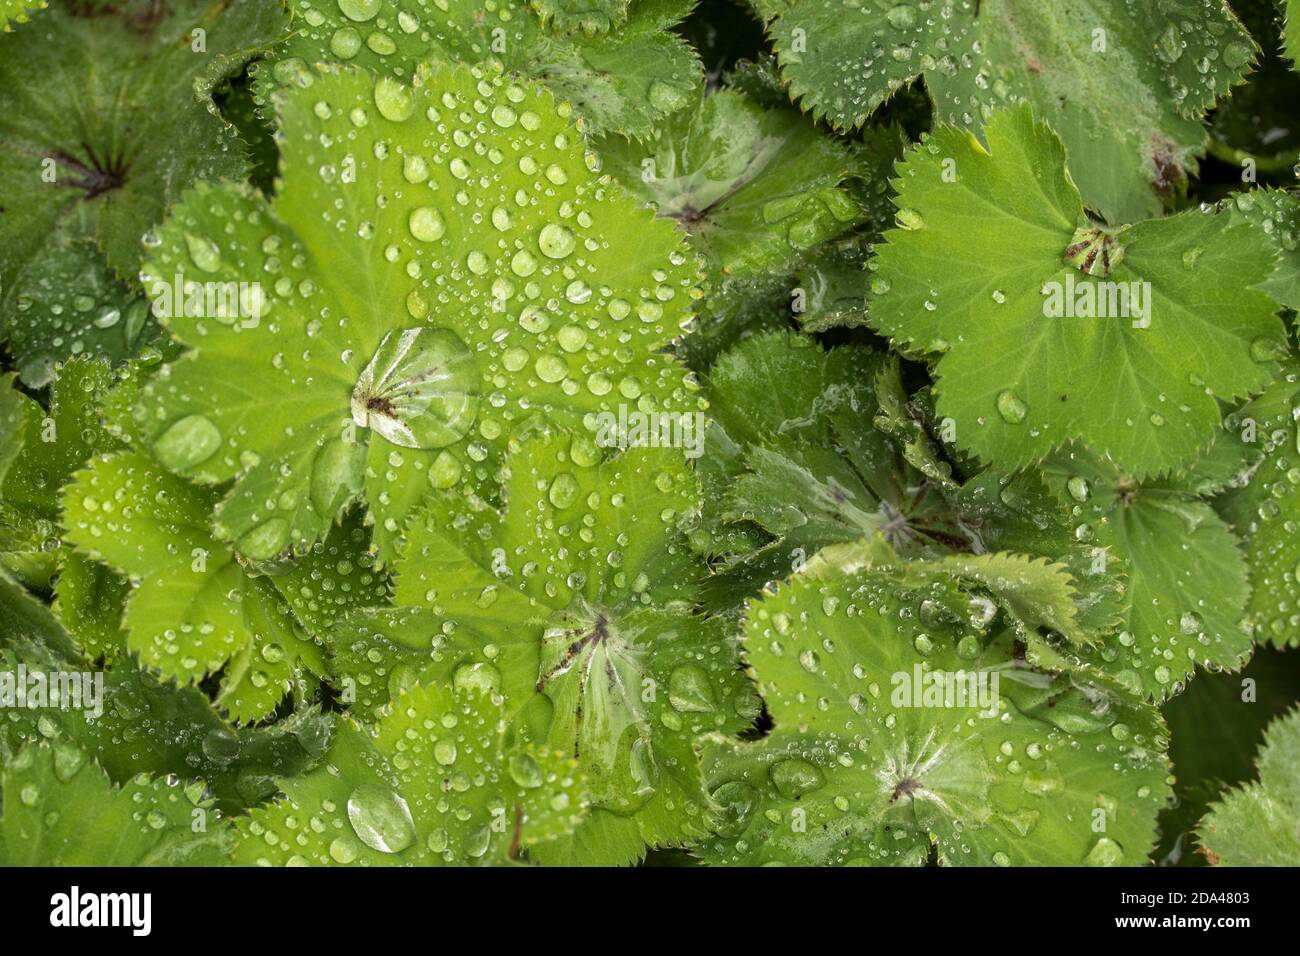 Natural abstract of water drop 'jewels' on the verdant leaves of Tellima grandiflora purpurteppich Stock Photo